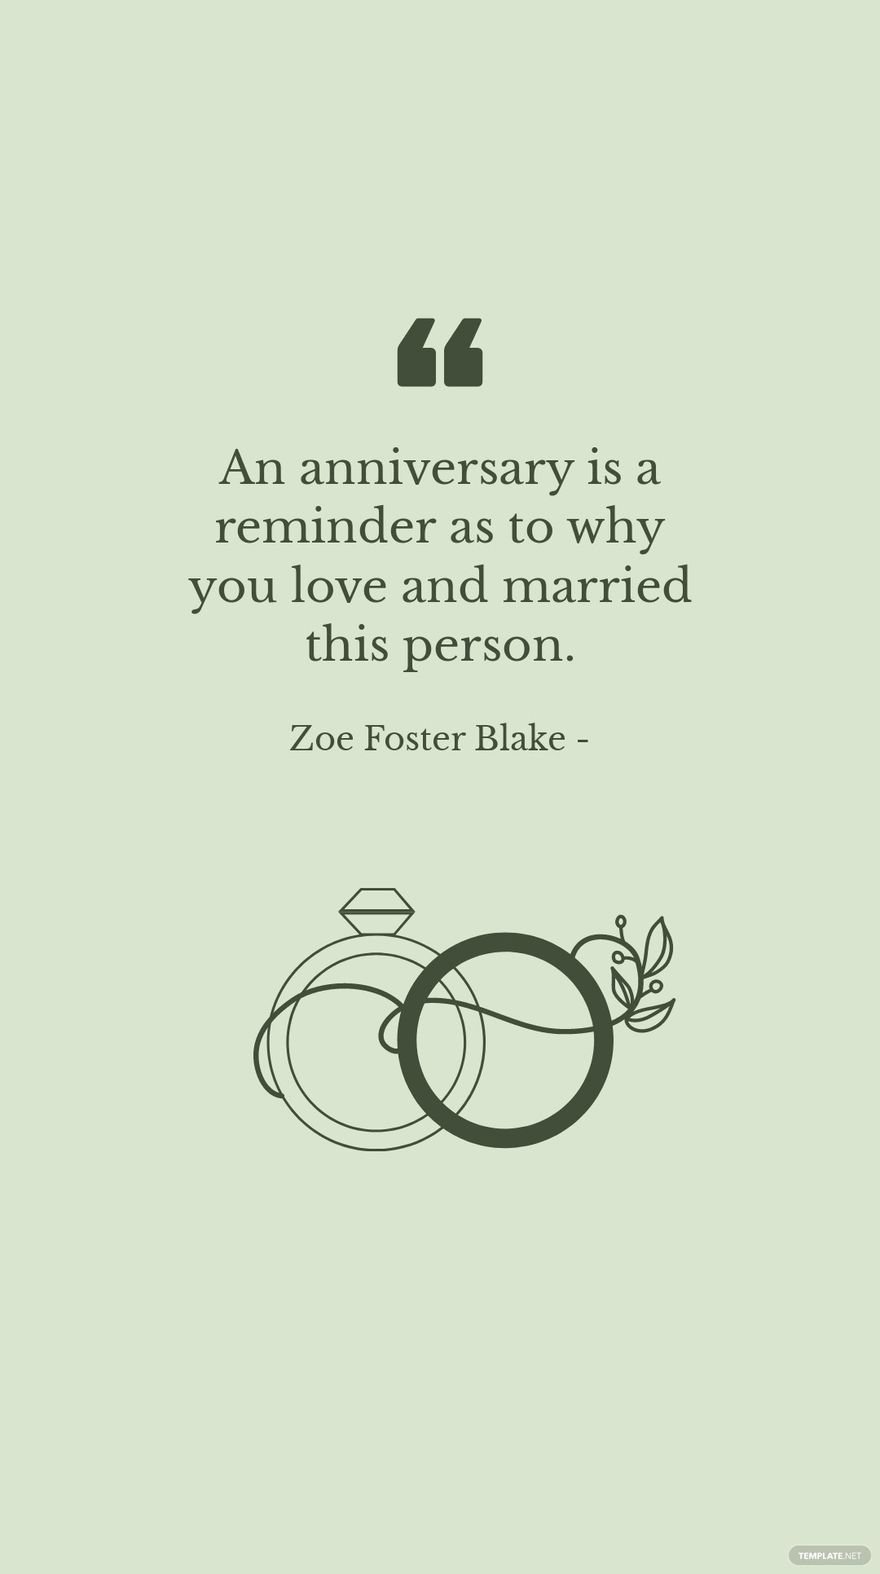 Free Zoe Foster Blake - An anniversary is a reminder as to why you love and married this person. in JPG